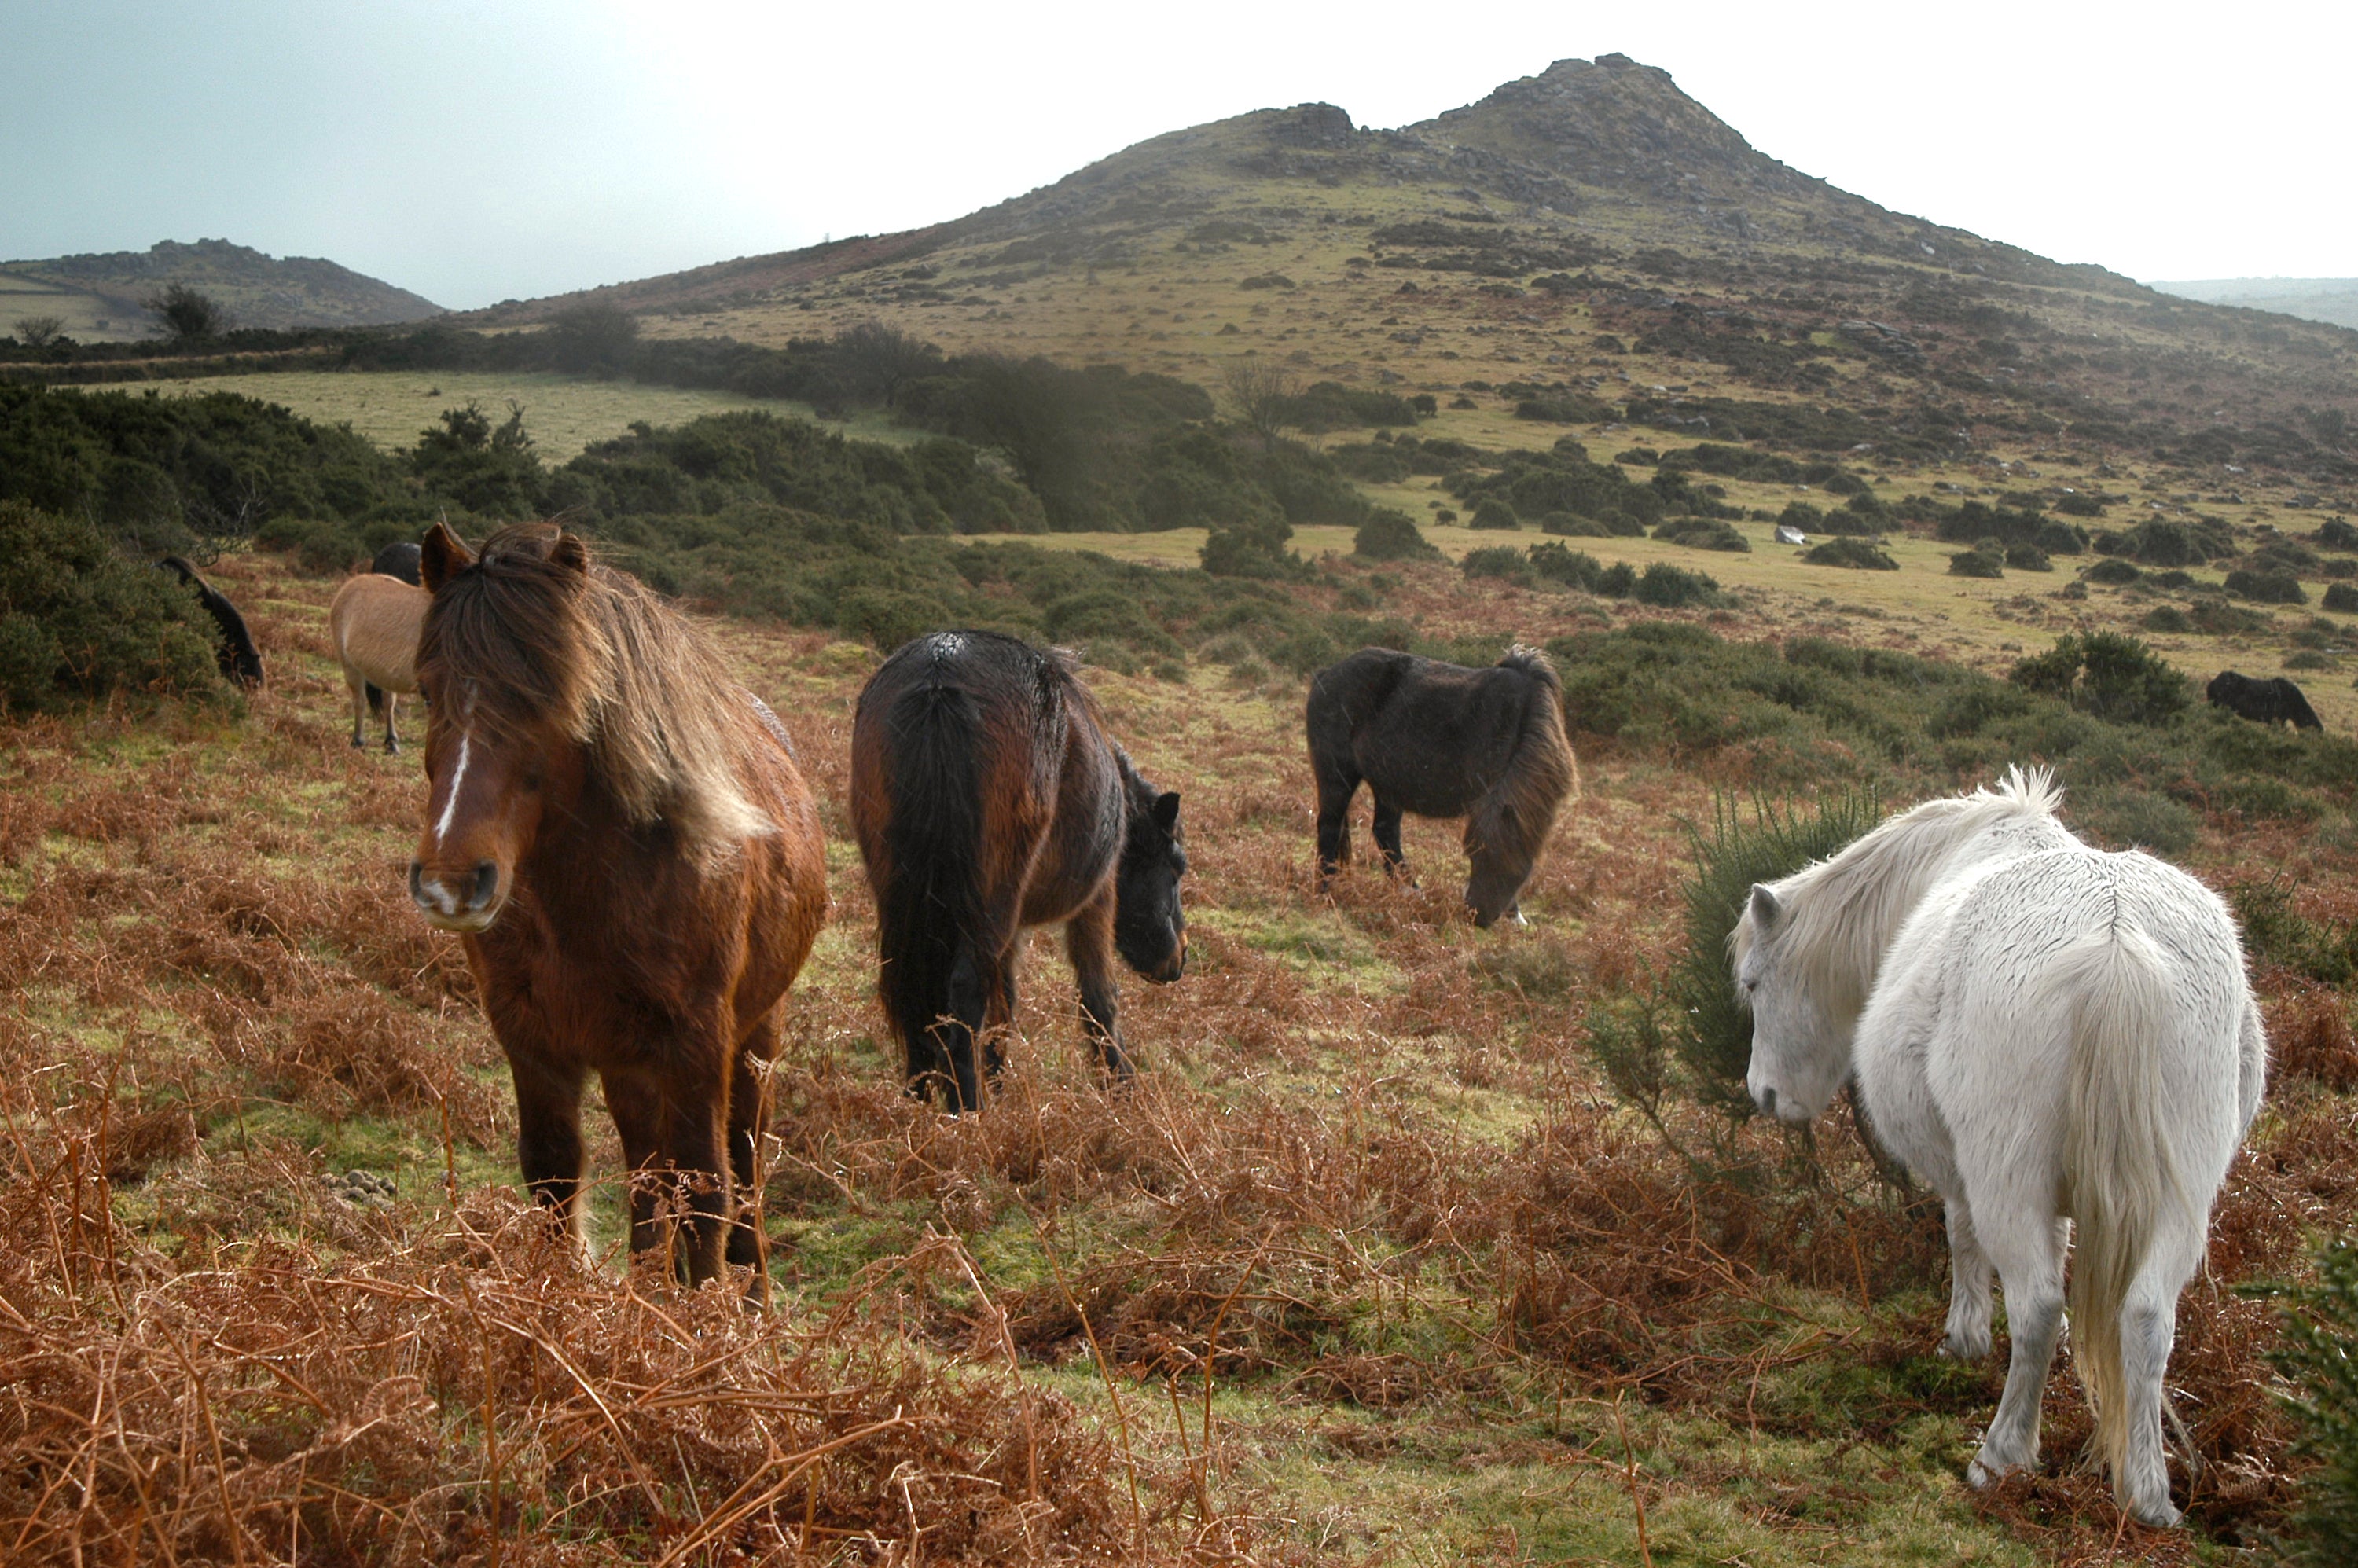 It is illegal to feed Dartmoor’s ponies